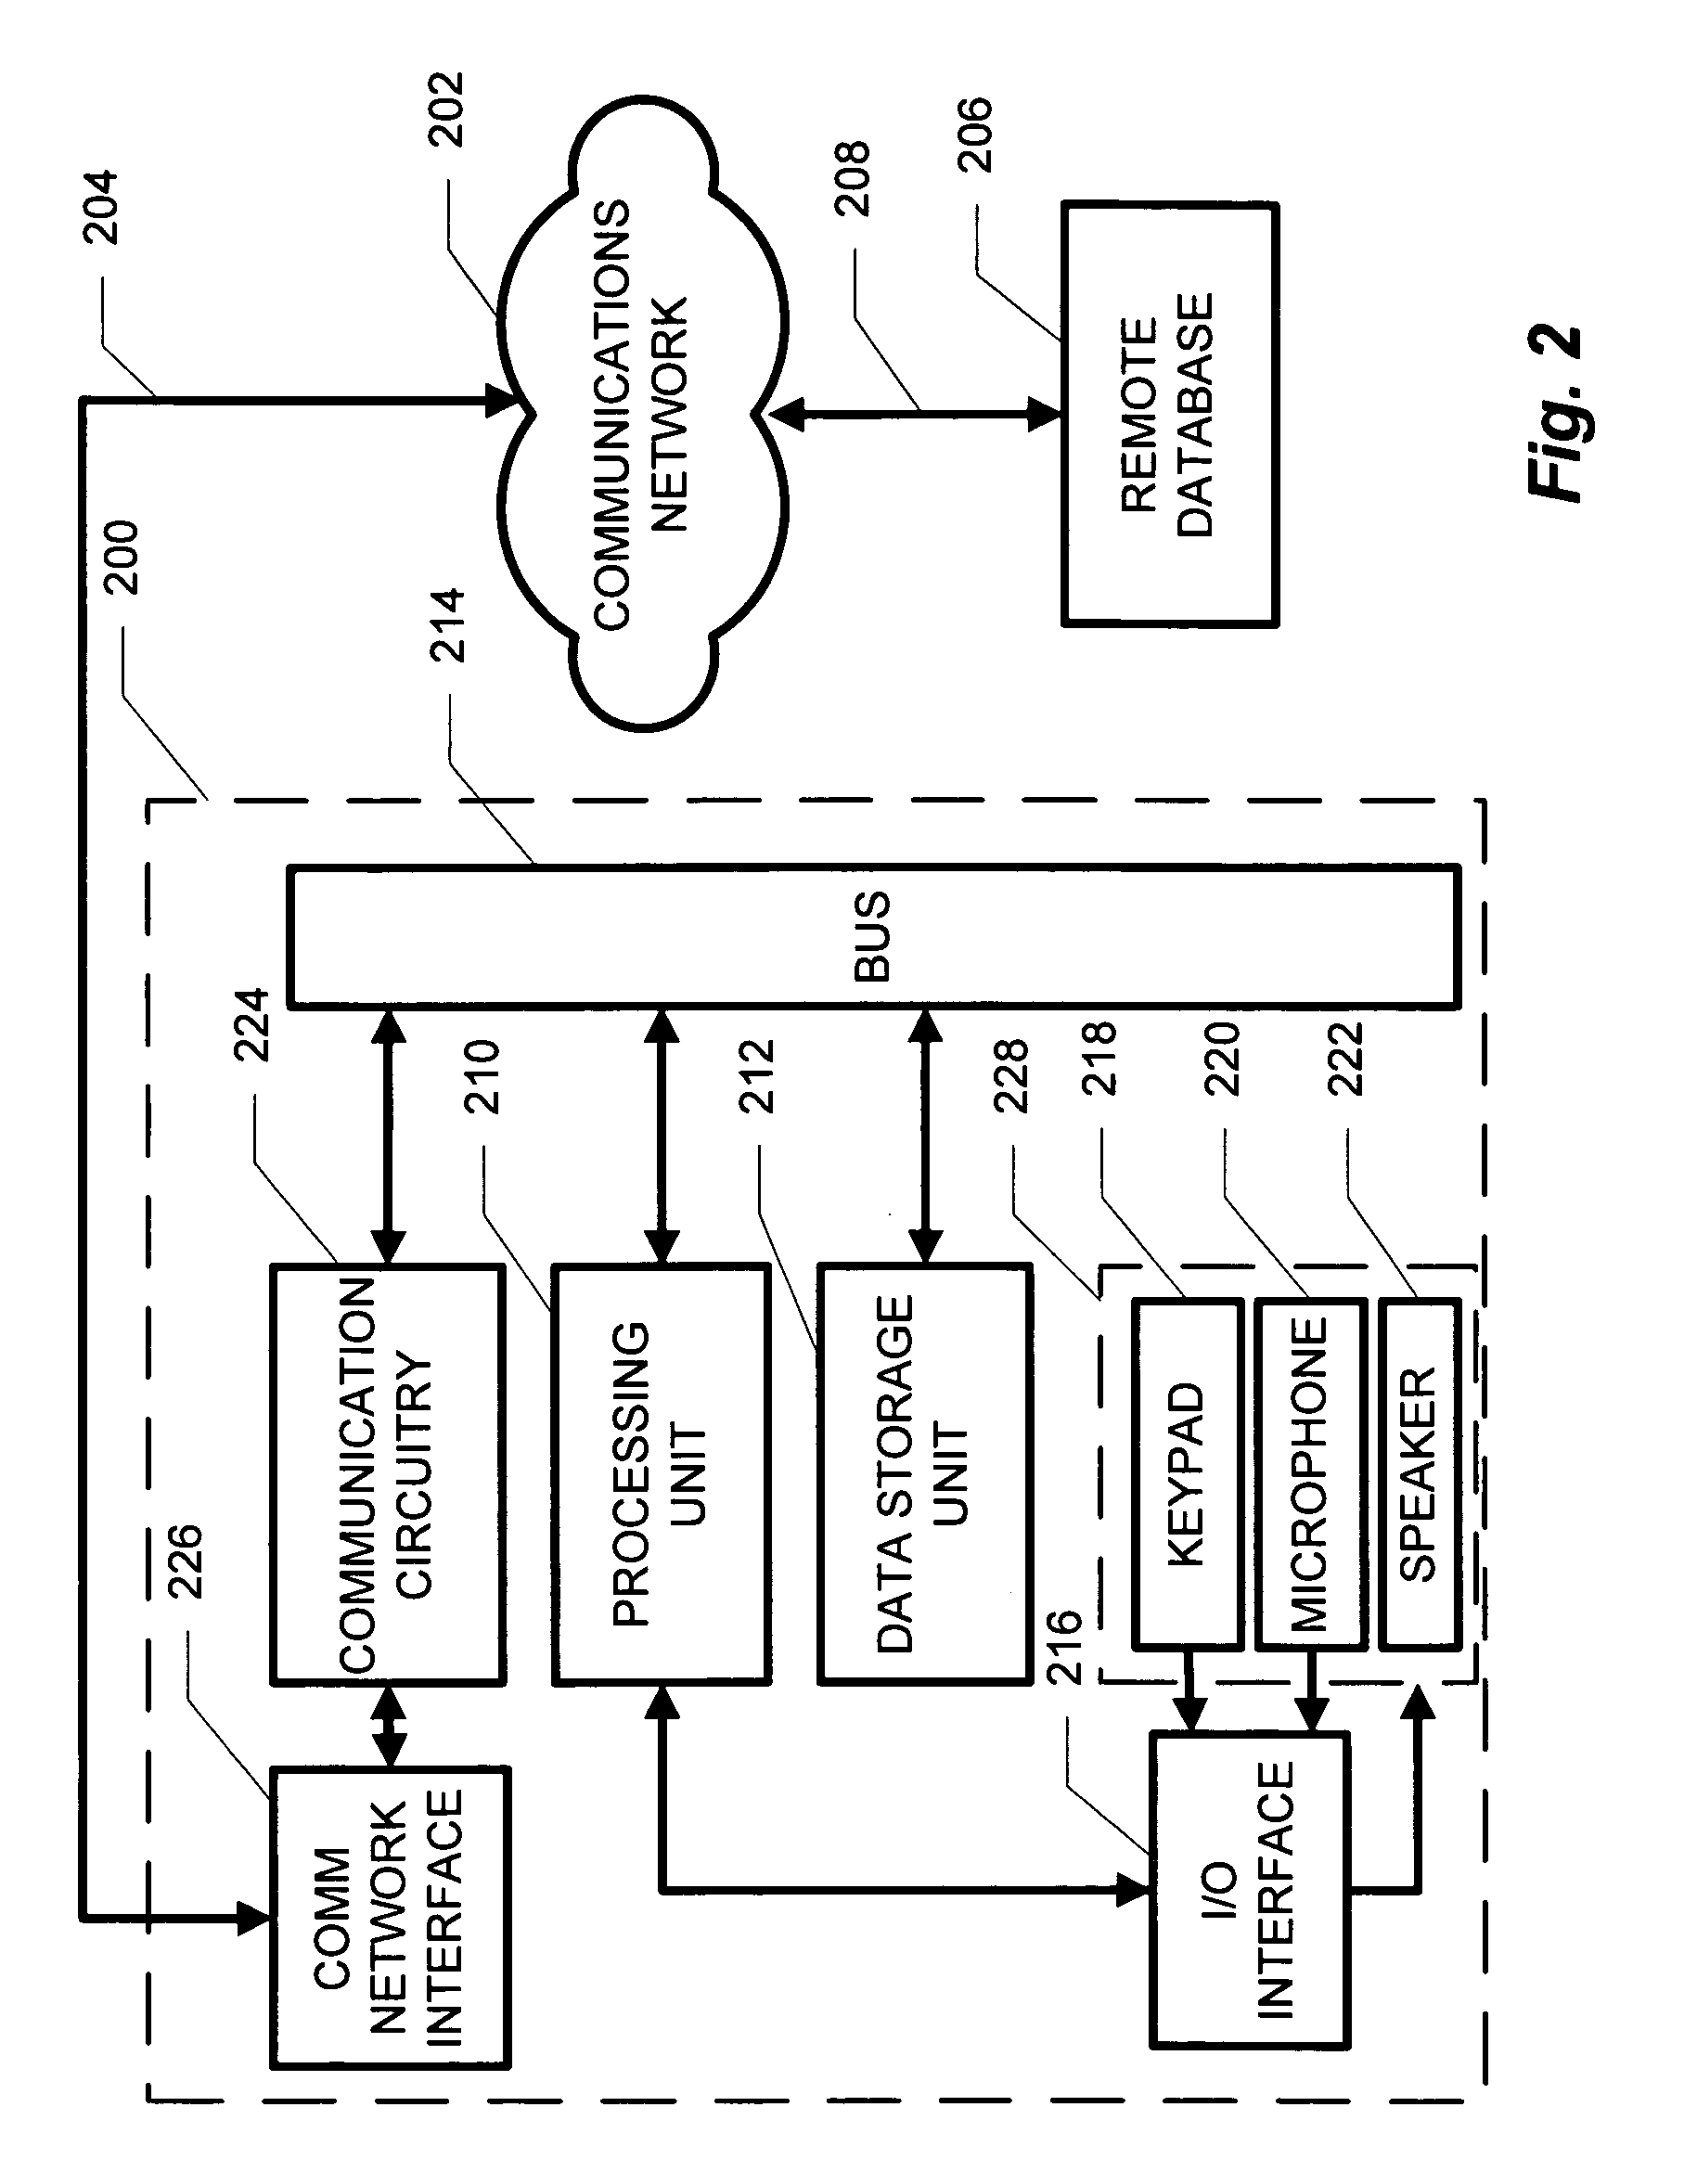 System and method for presenting caller identification logs